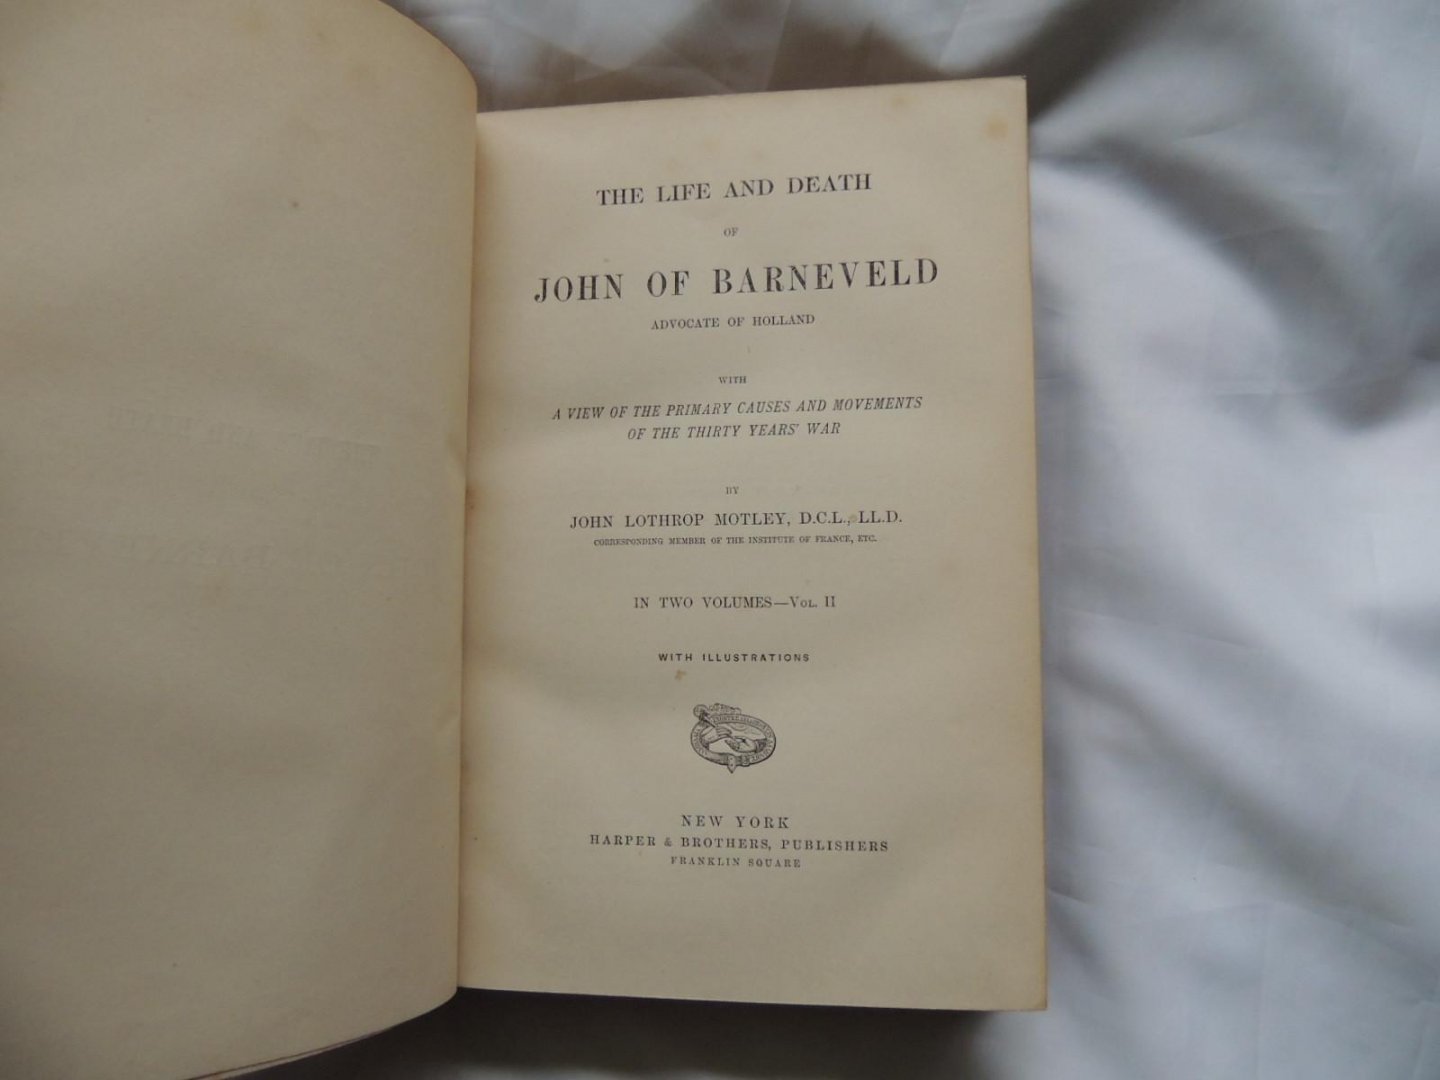 Motley, John Lothrop - Life and death of John of Barneveld : with a view of the primary causes and movements of the Thirty Years' War. in Two Volumes with illustrations